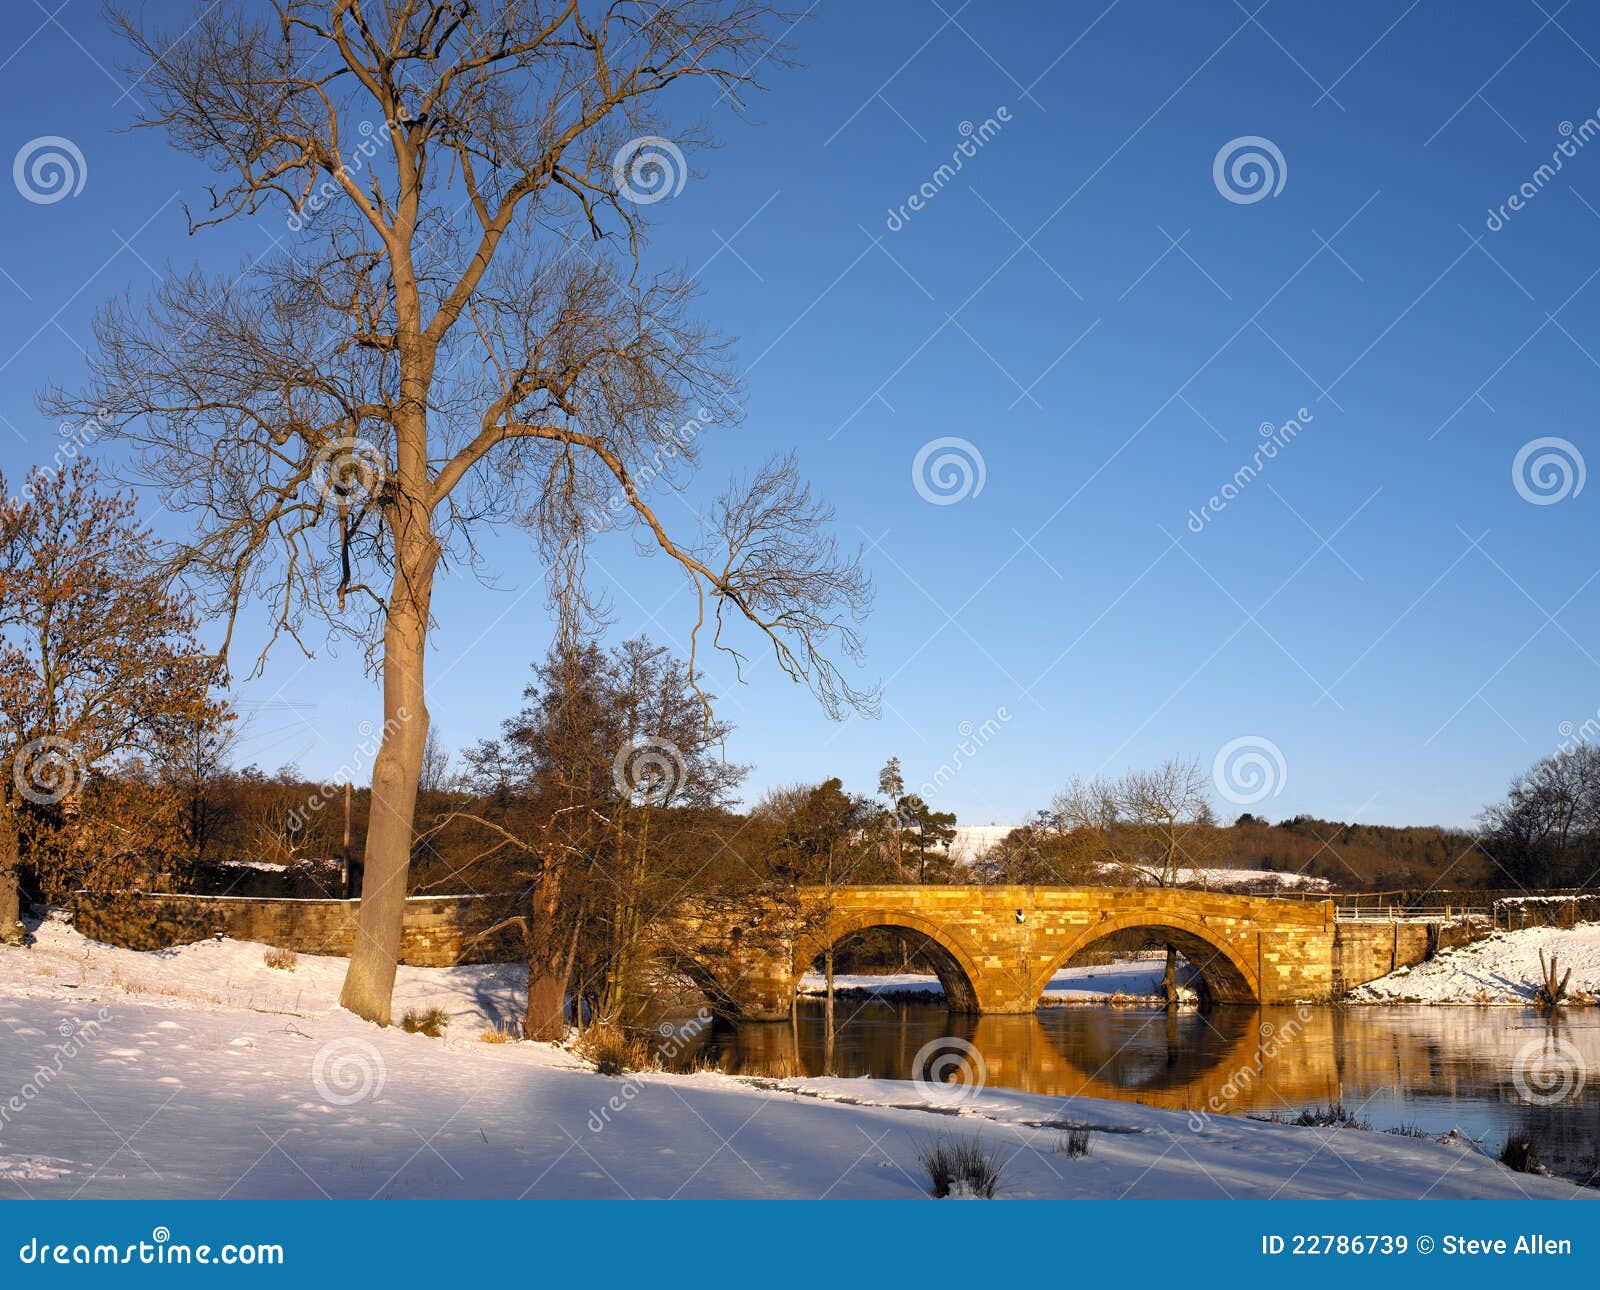 Royalty Free Stock Images: Winter Scenery - North Yorkshire - England